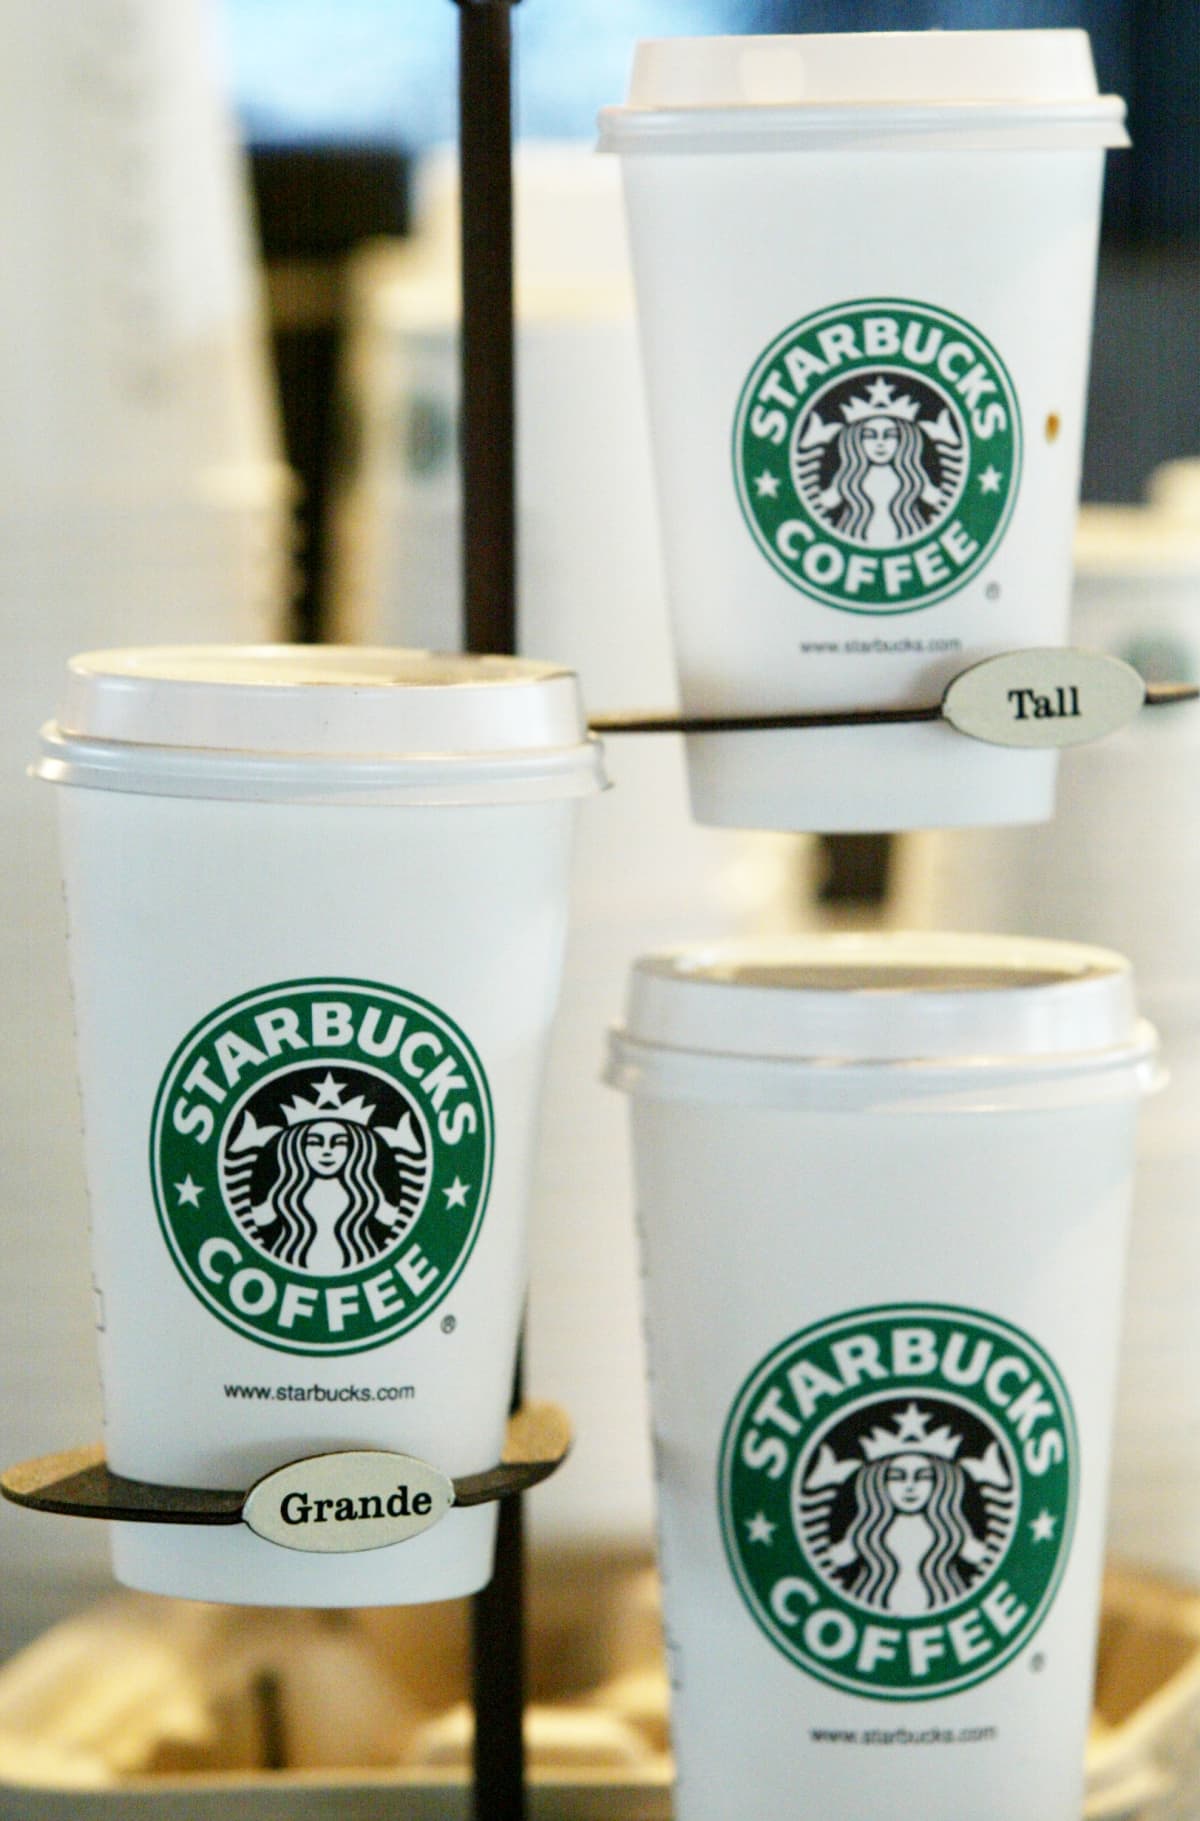 A paper Starbucks cup in front of a Starbucks store.